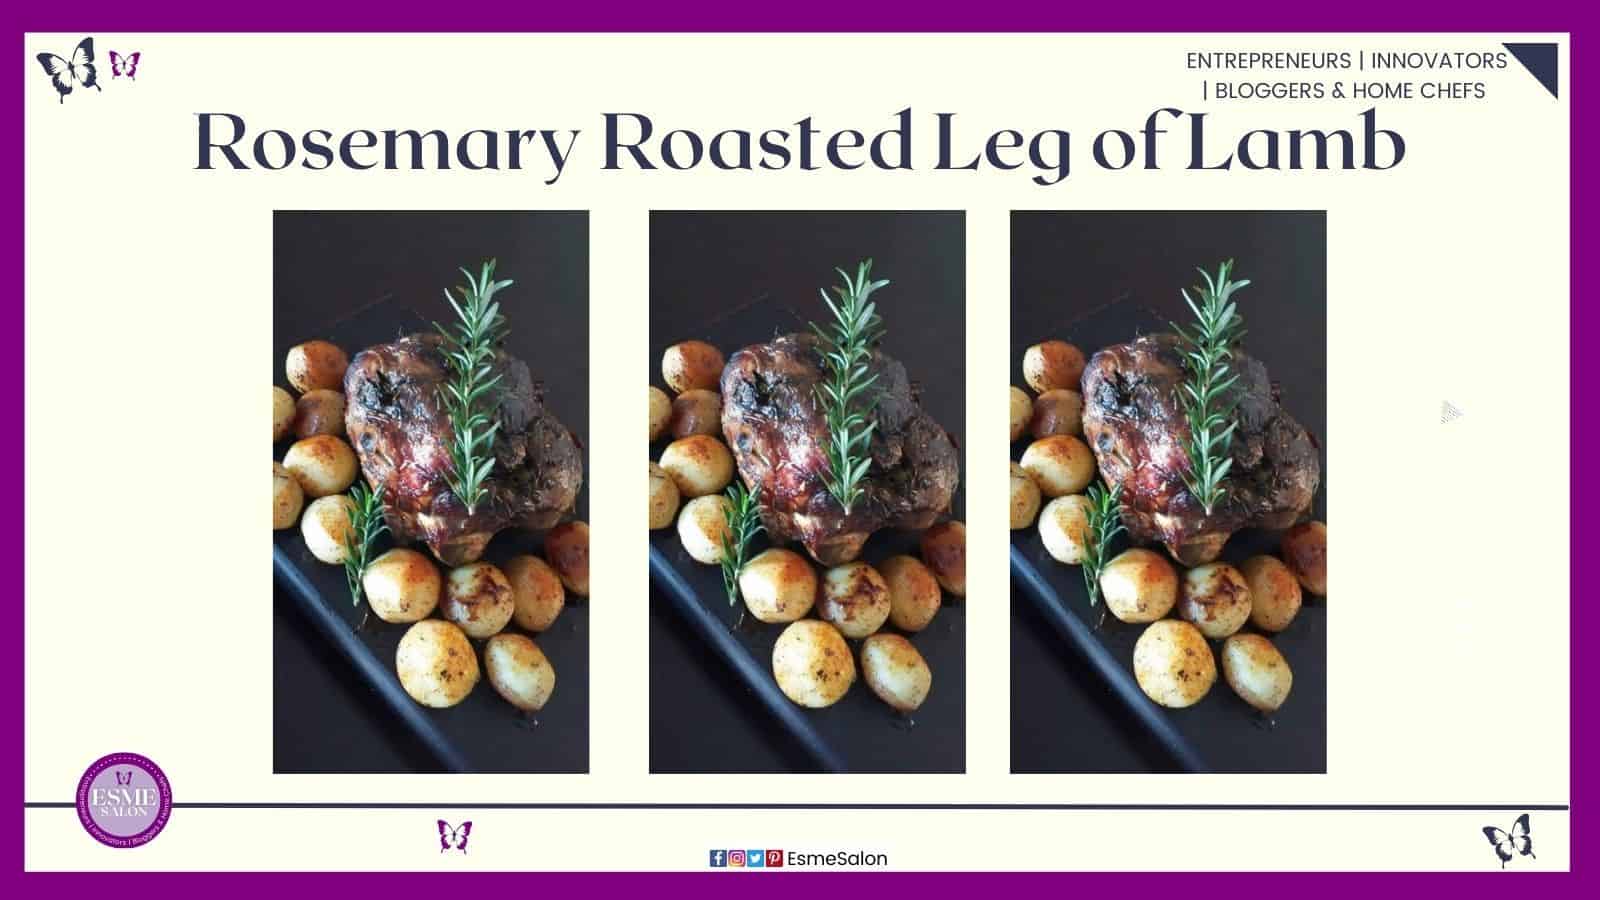 an image of a Rosemary Roasted Leg of Lamb for Sunday lunch with potatoes